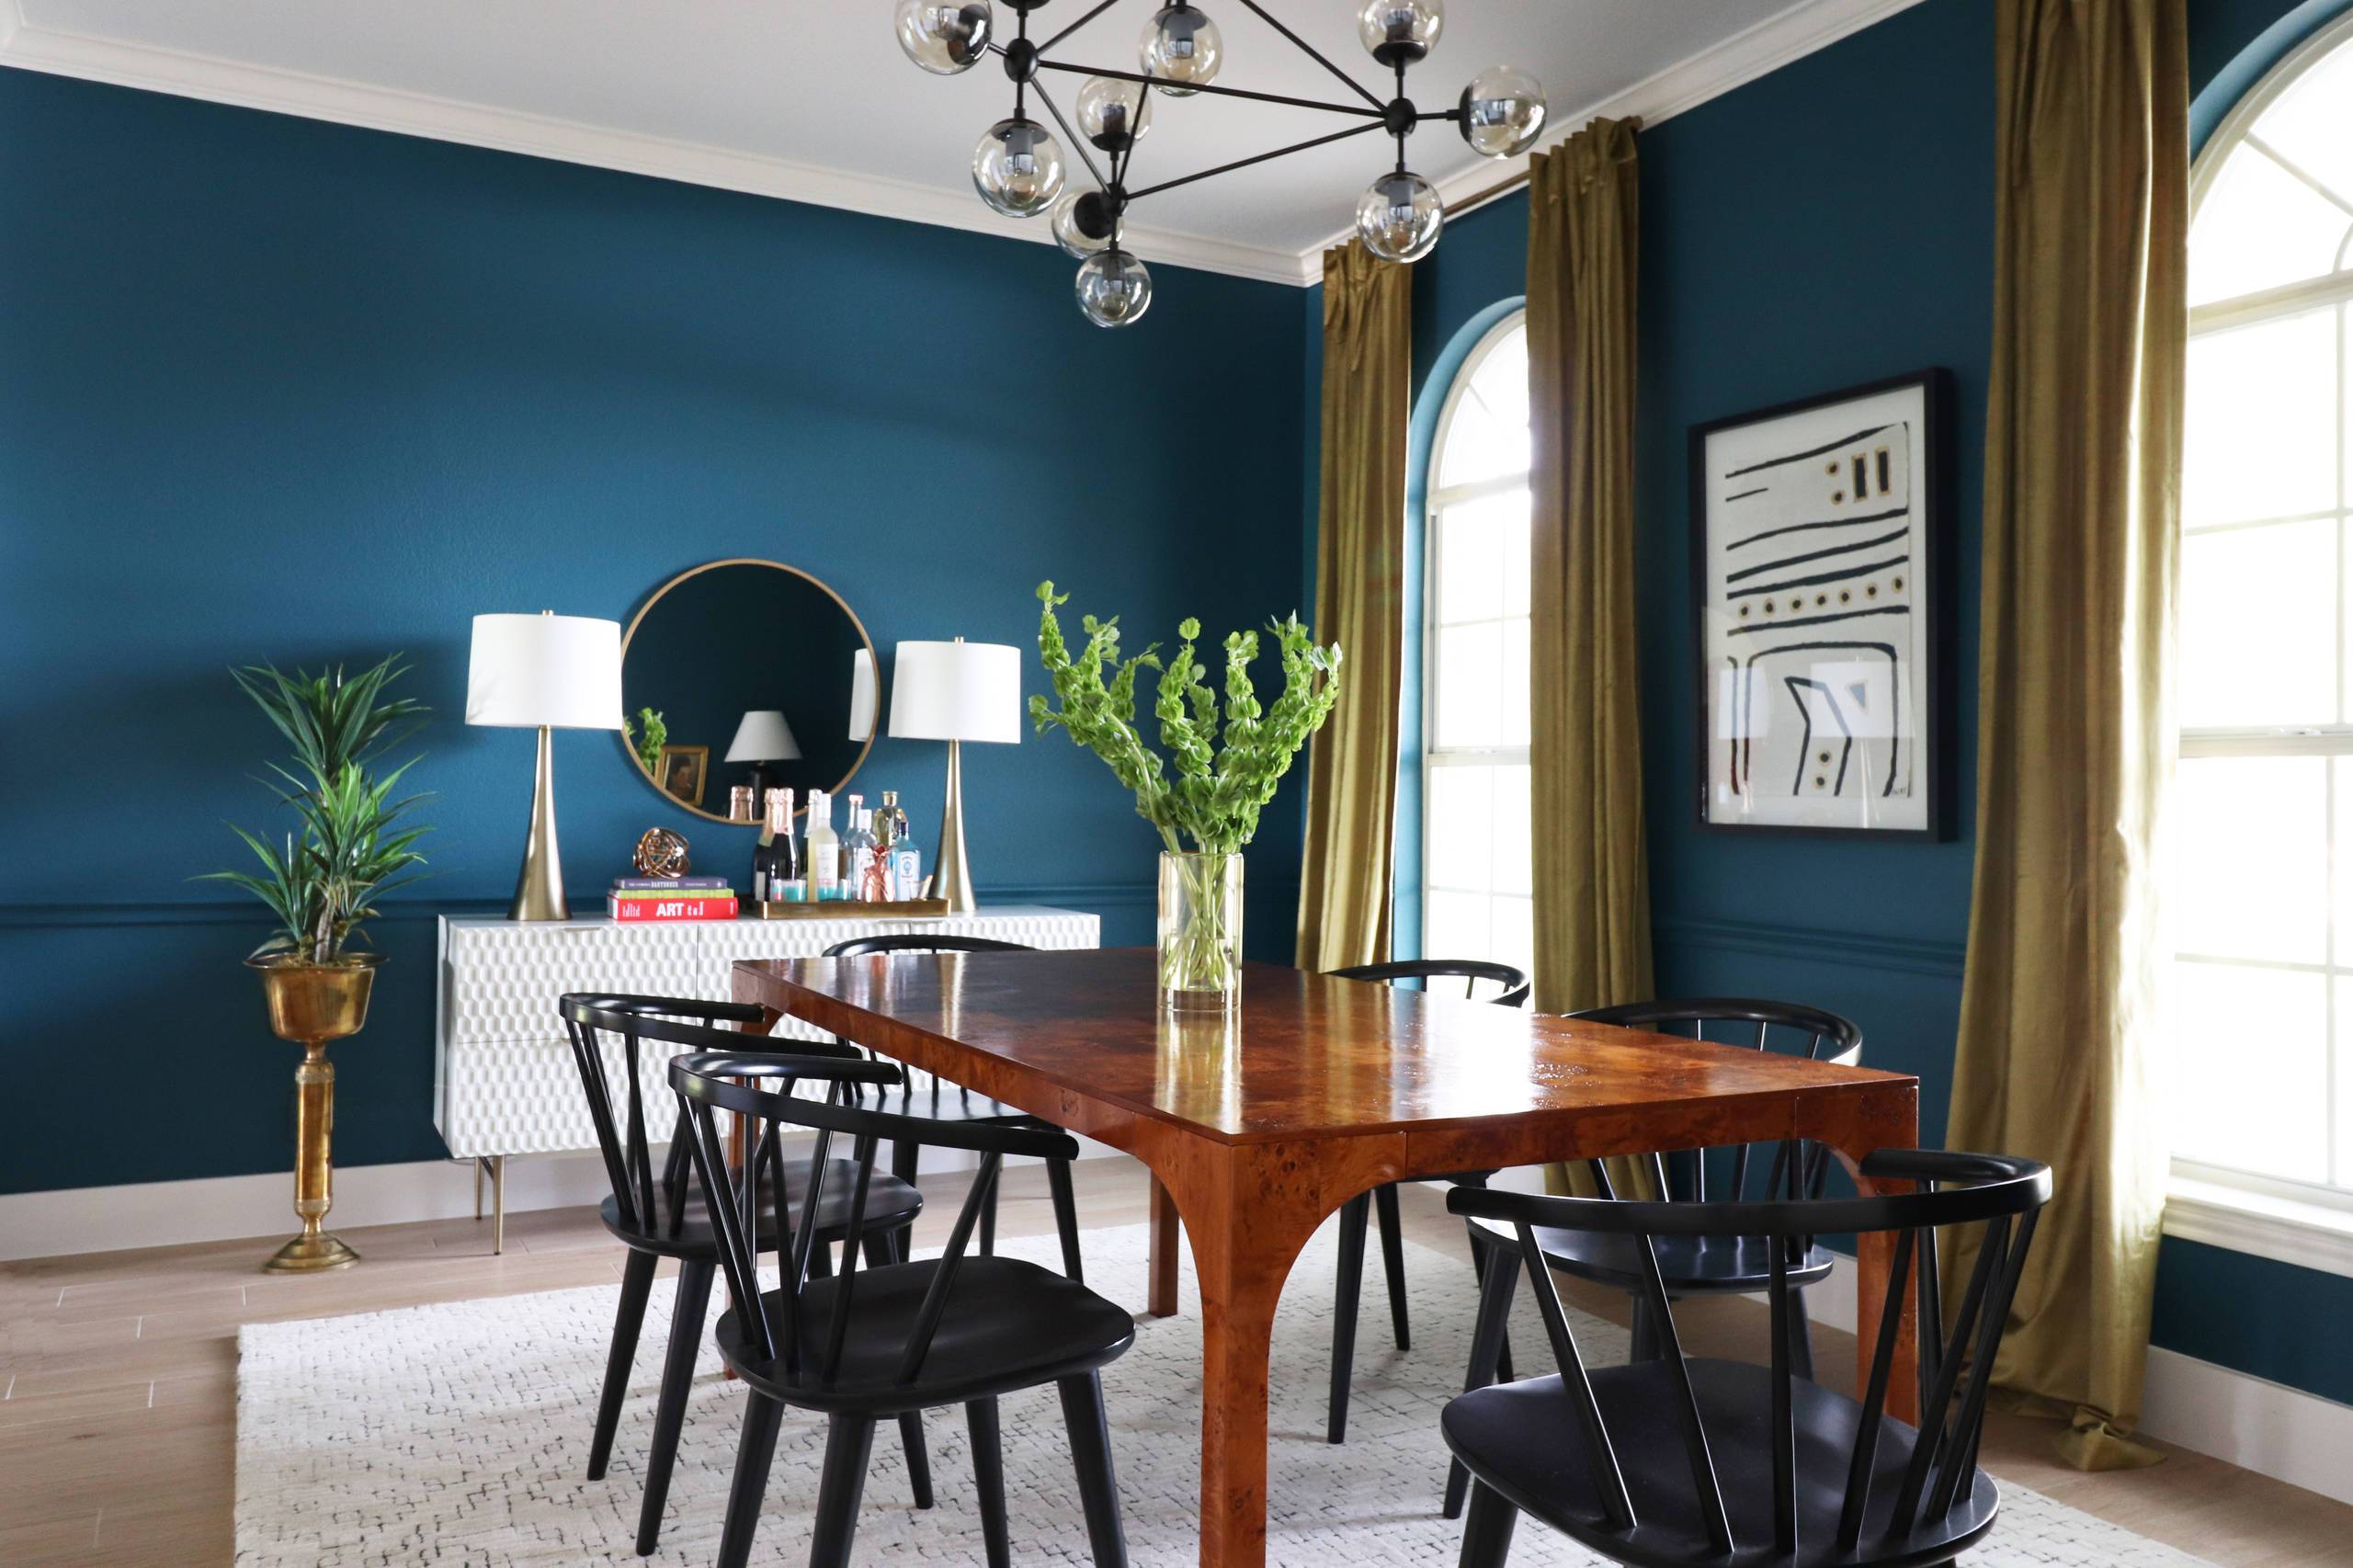 Black and white artwork for bold walls (from Houzz)